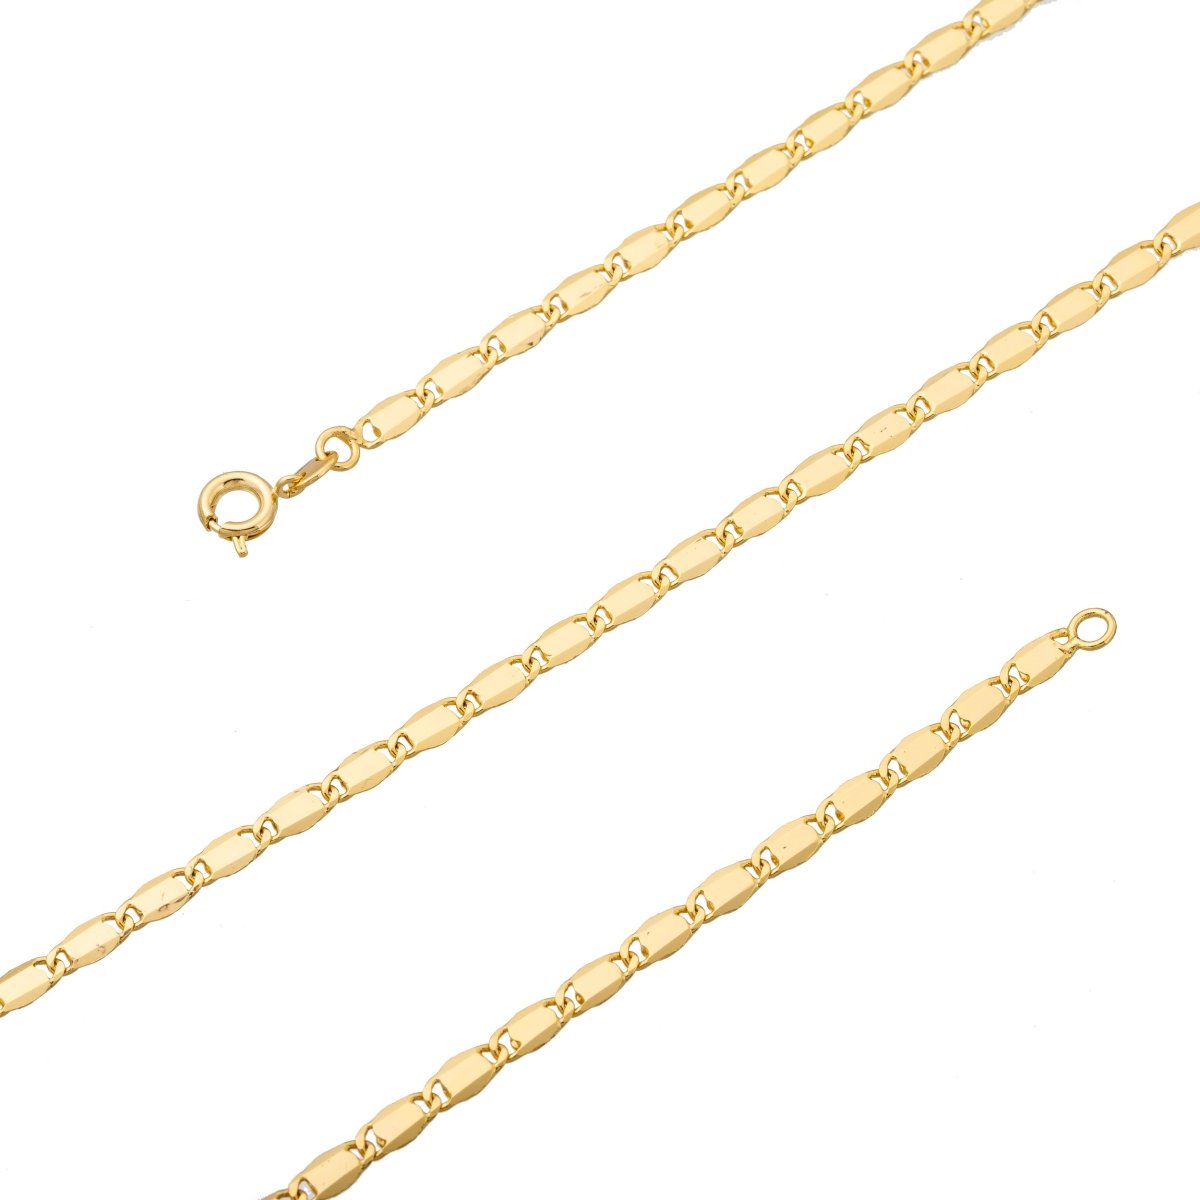 23.5 inch Scroll Chain Necklace, 24K Gold Plated Unique Finished Necklace For Jewelry Making, Dainty 1.7mm Unique Necklace w/ Spring Ring | CN-280 - DLUXCA